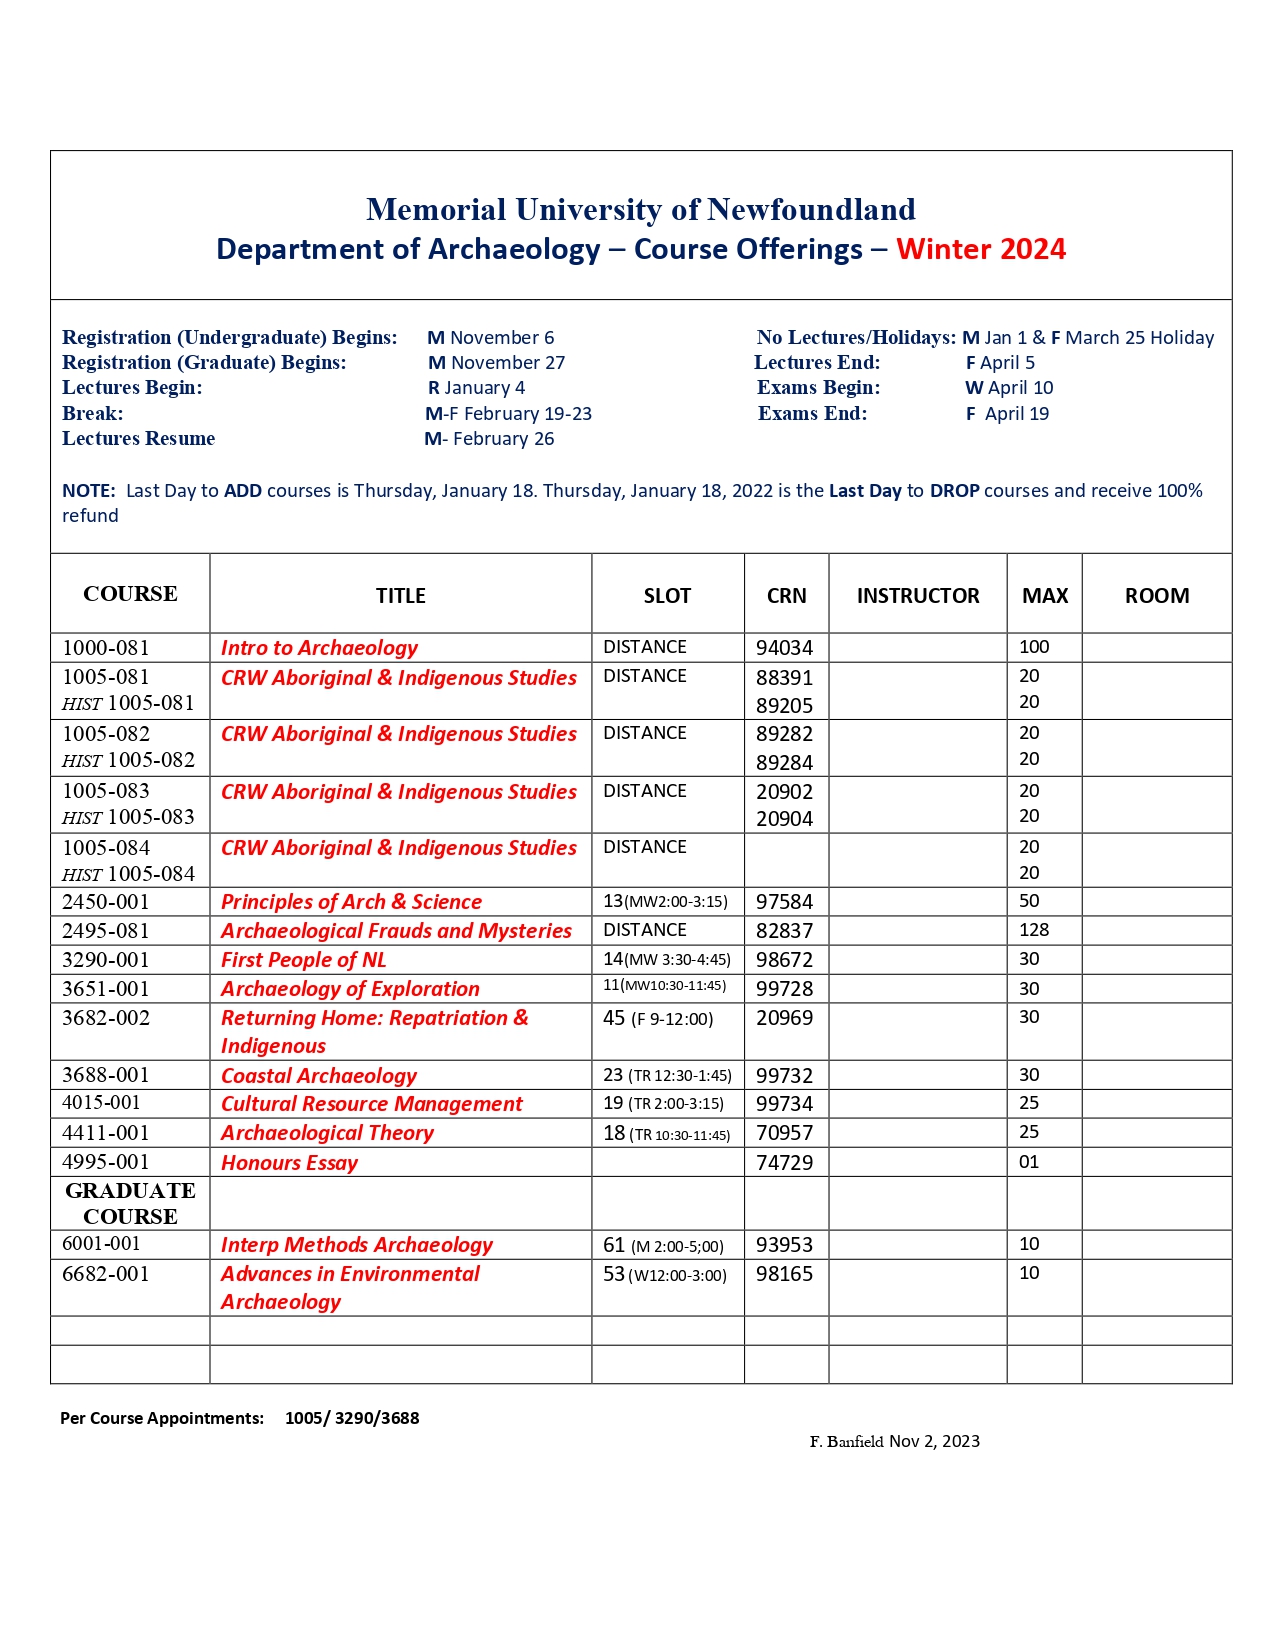 Archaeology course offerings for the Winter 2024 semester